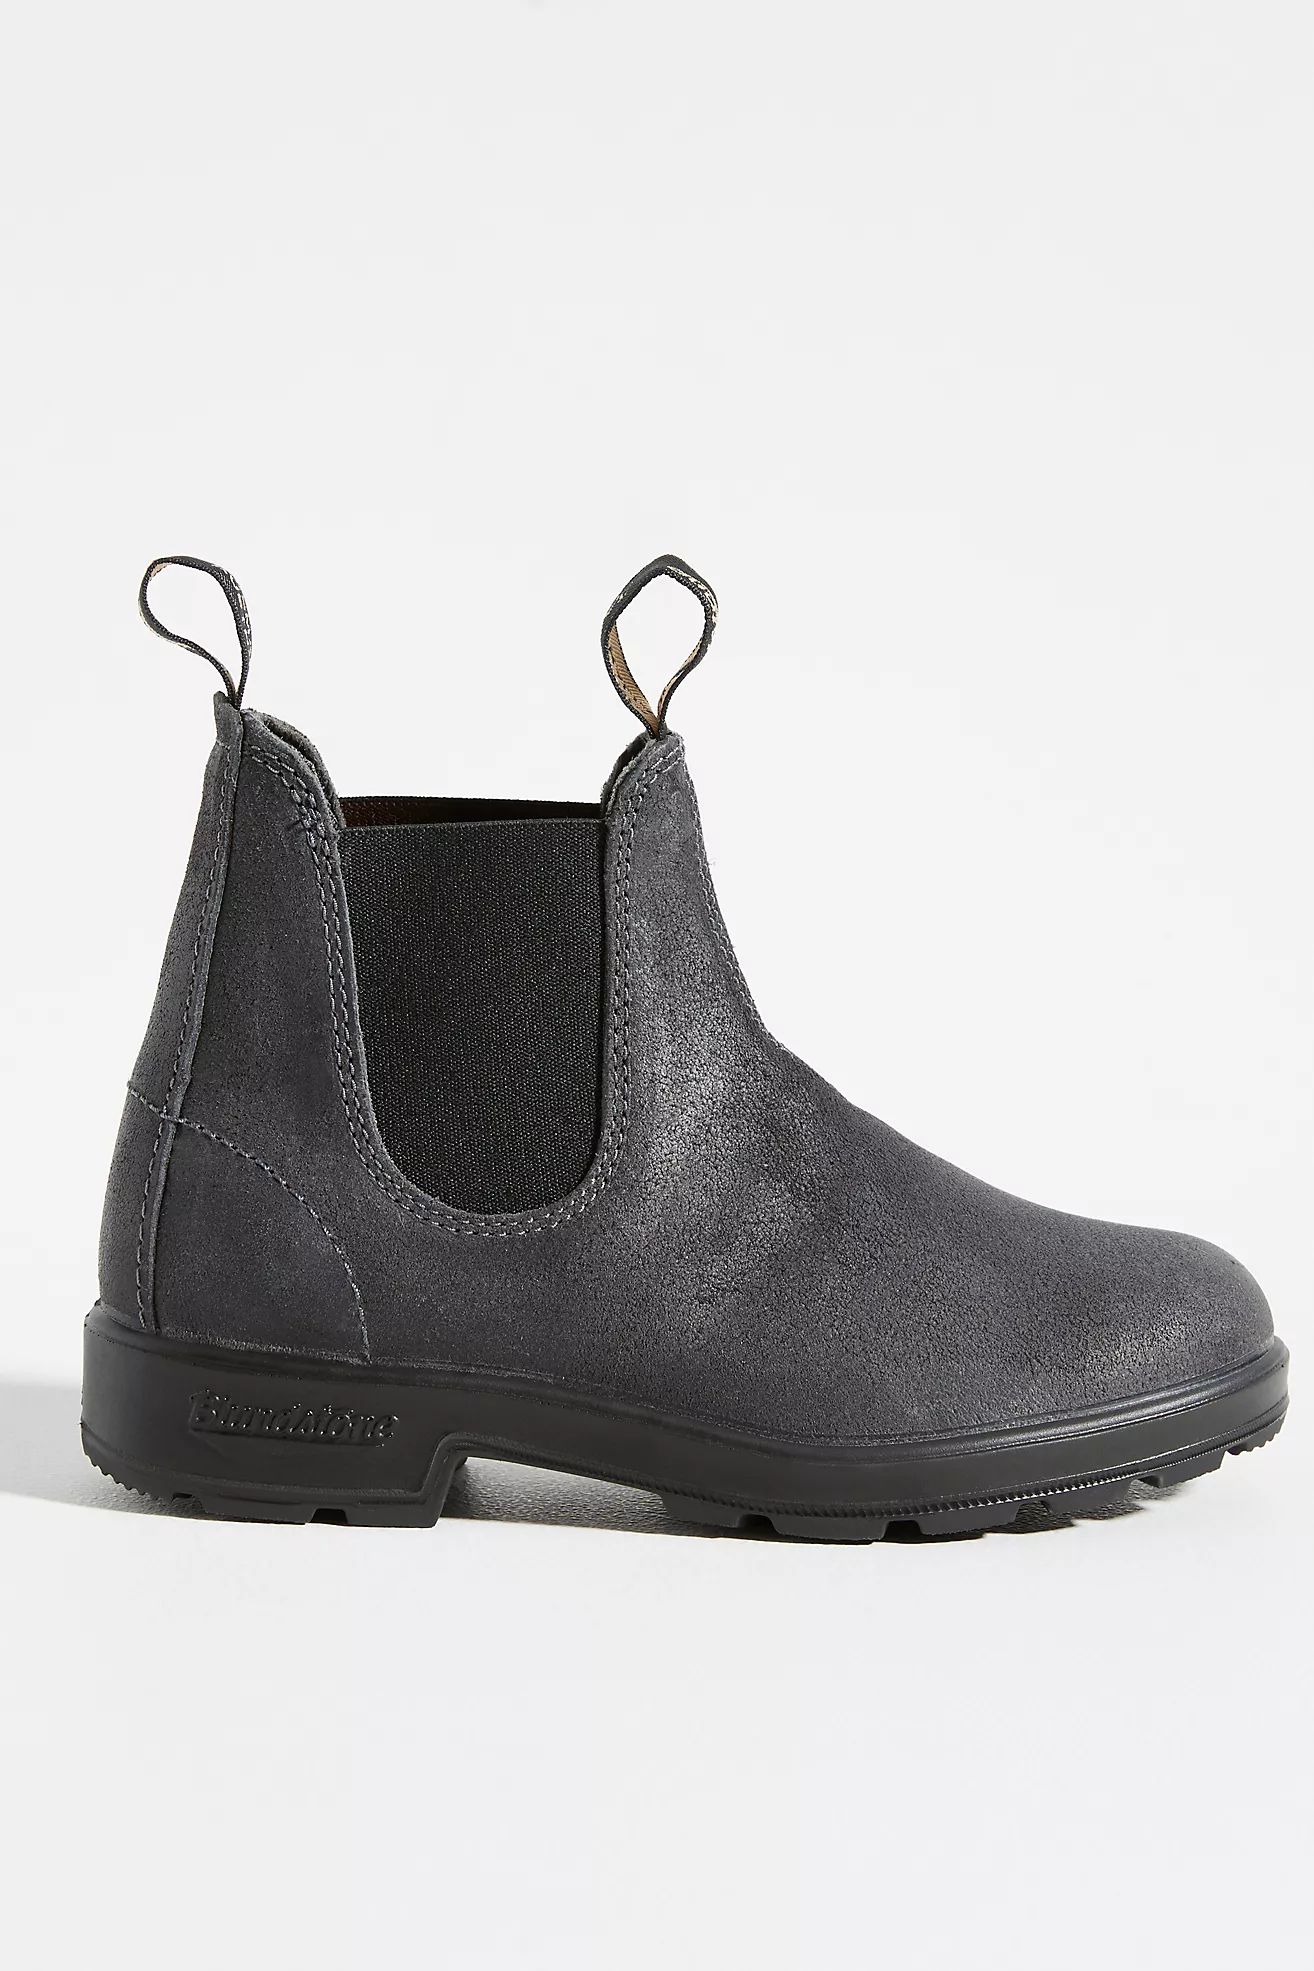 Blundstone Chelsea Boots | Anthropologie (US)